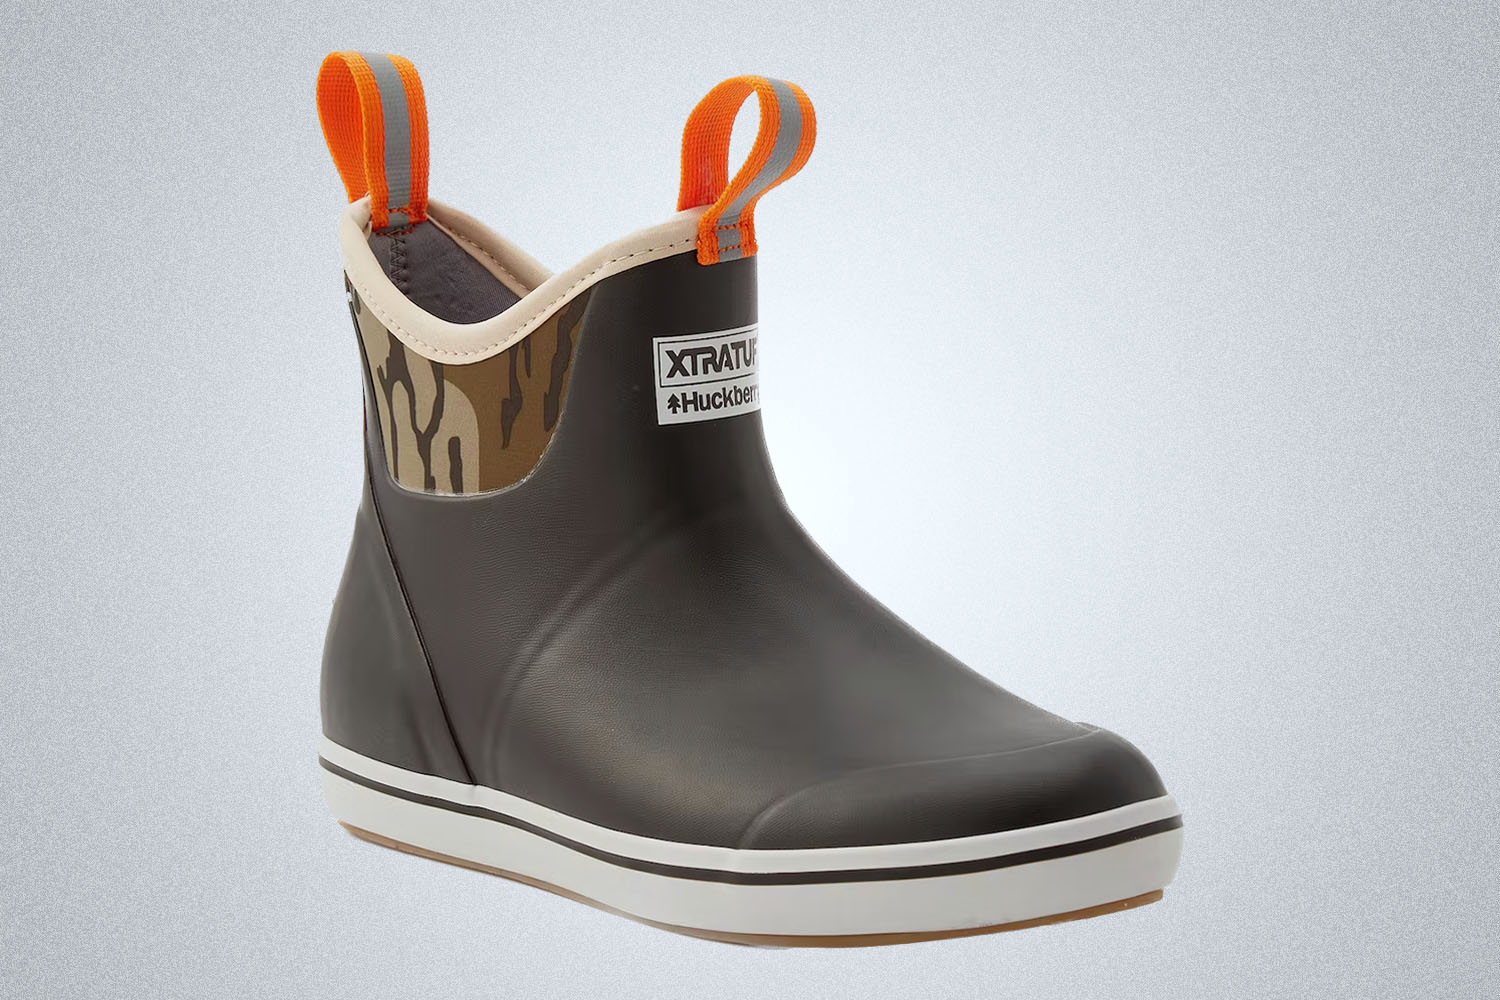 The Best Rain Boot for Virtually Any Guy: Huckberry x Xtratuf Mossy Oak Deck Boot